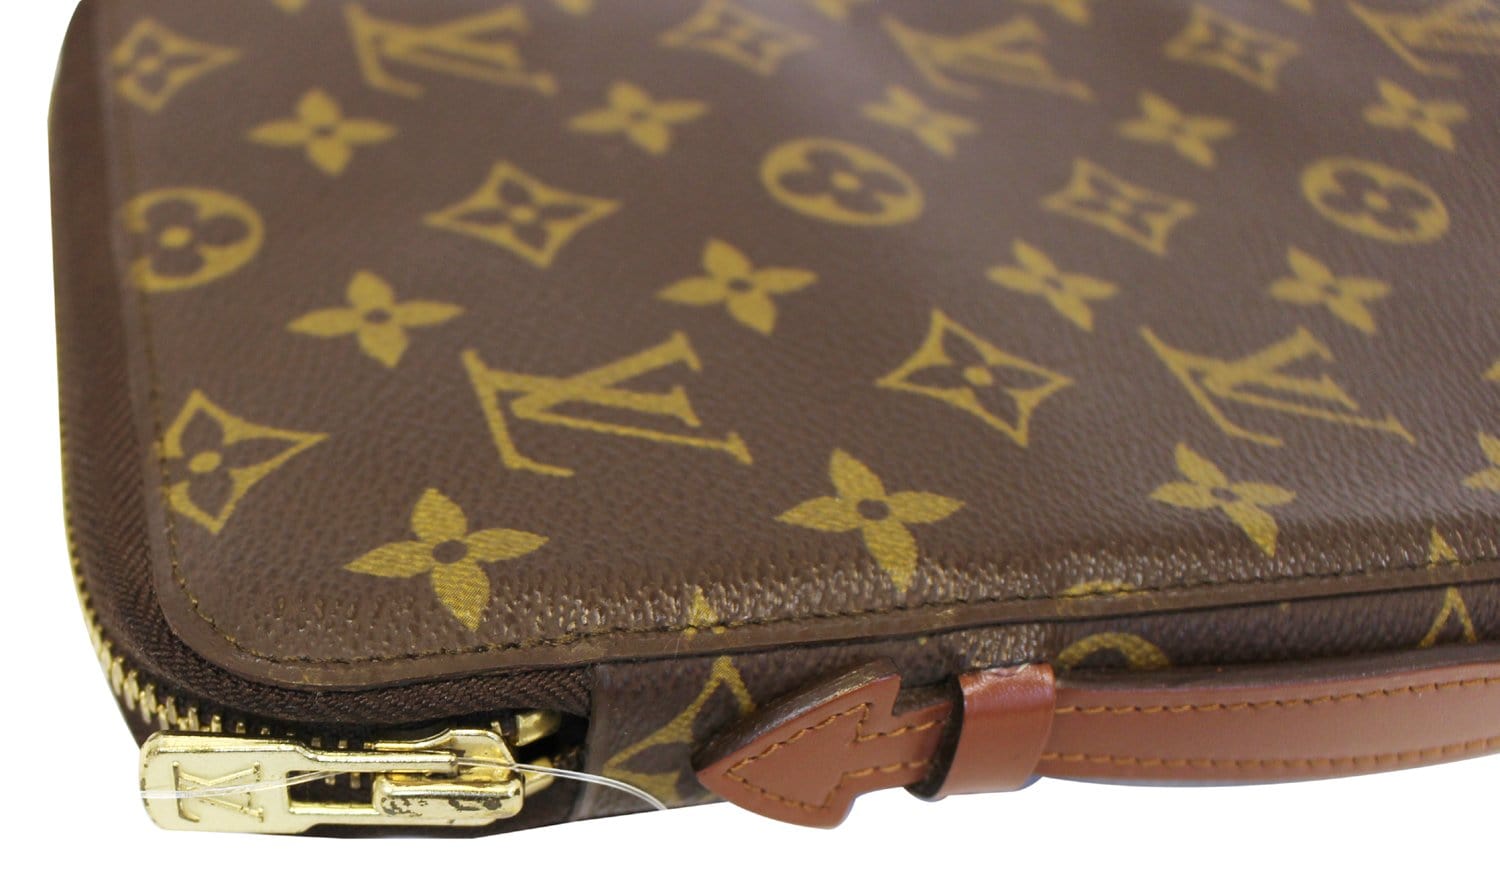 Louis Vuitton Monogram Daily Organizer Travel Case Long Wallet Black - A  World Of Goods For You, LLC